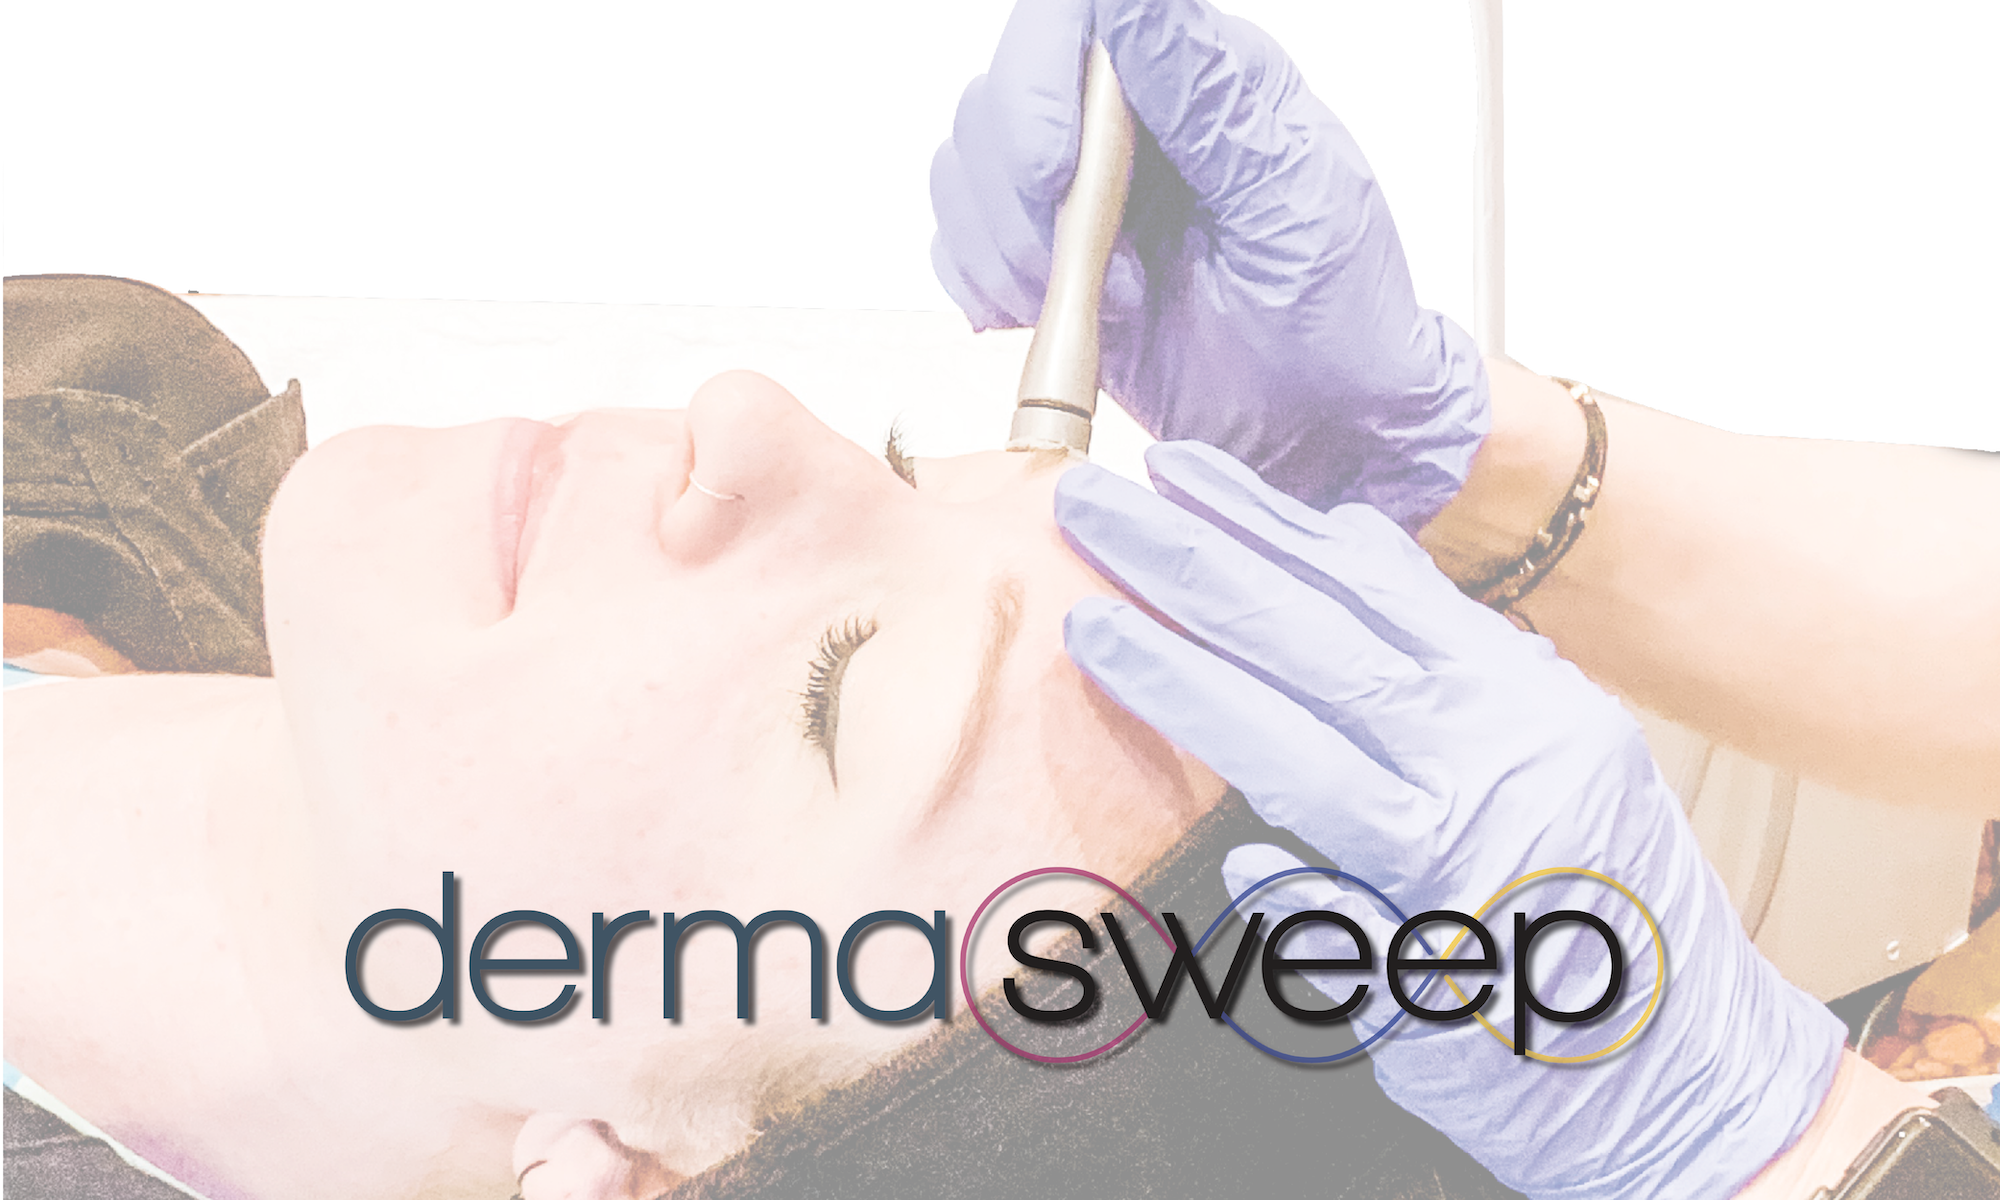 Interview with DermaSweep: Life Unfiltered Can Be Beautiful